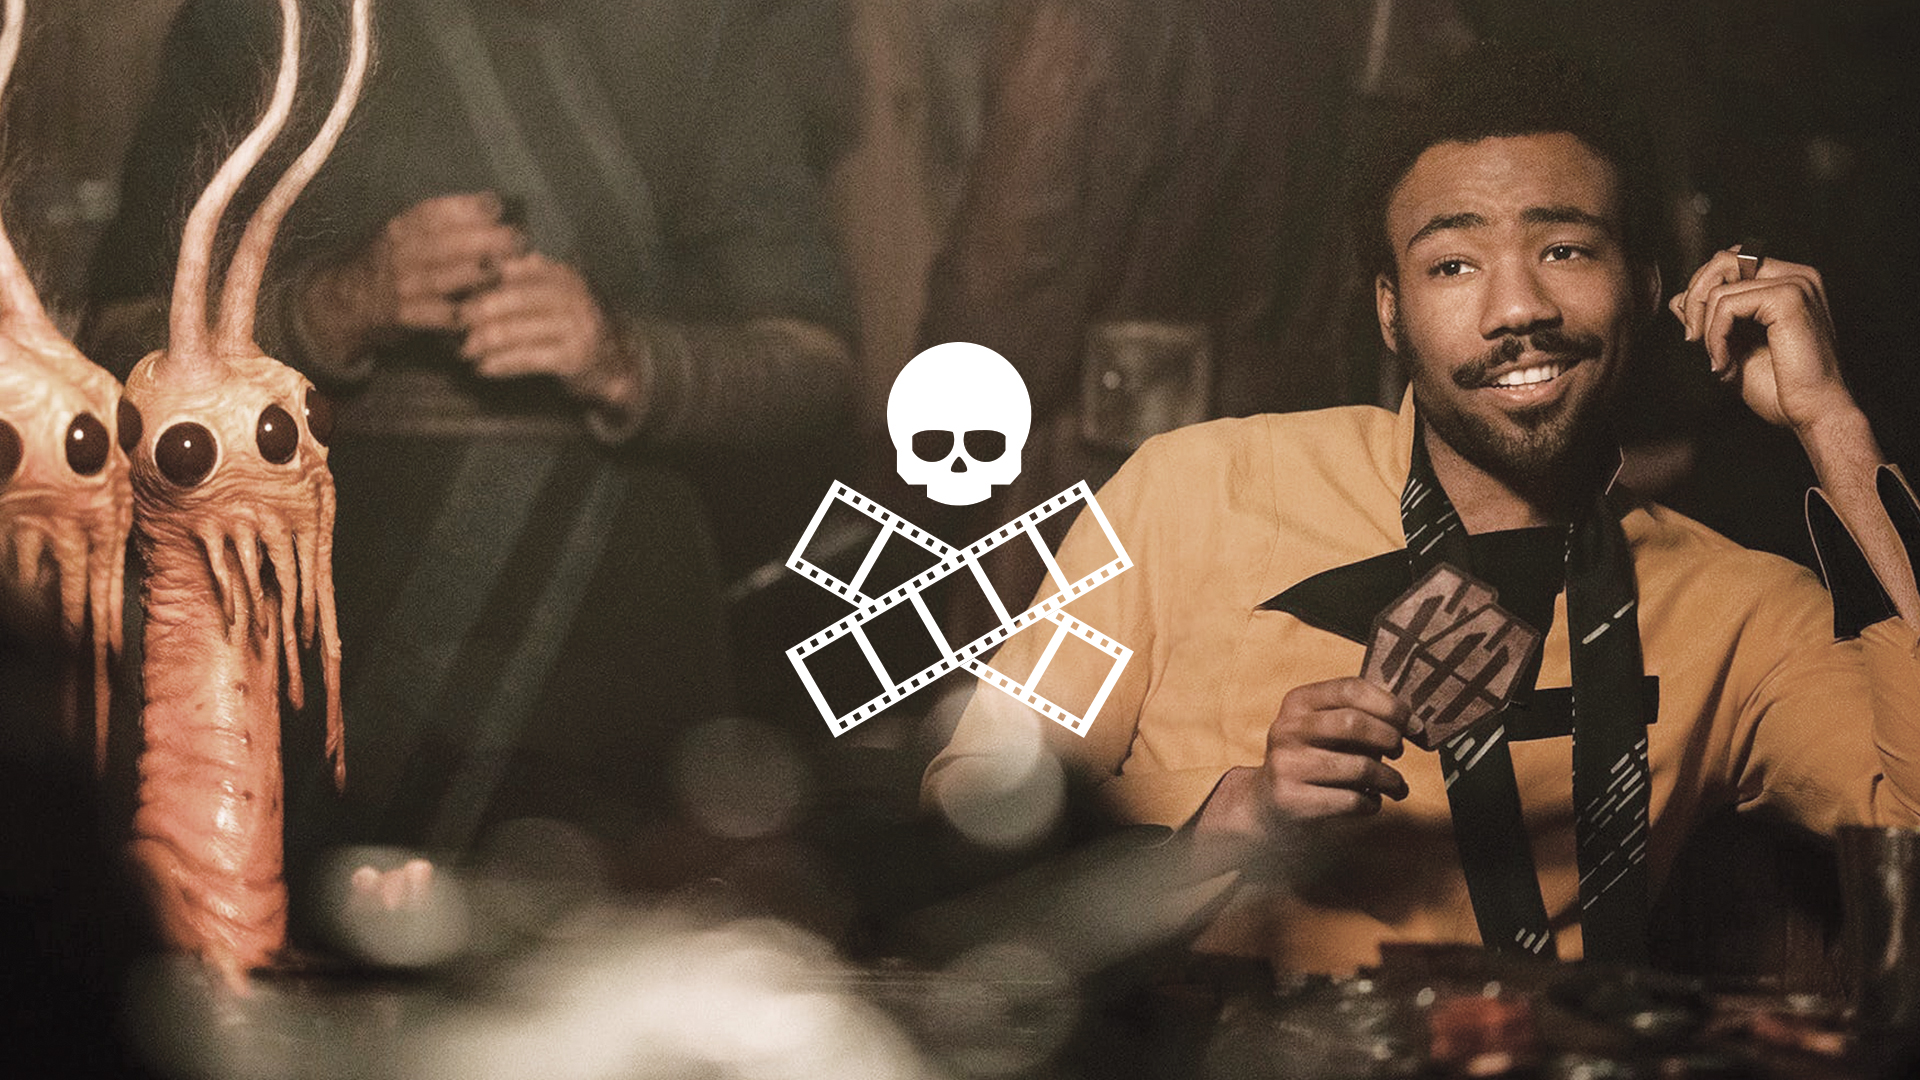 127. Solo: A Star Wars Story